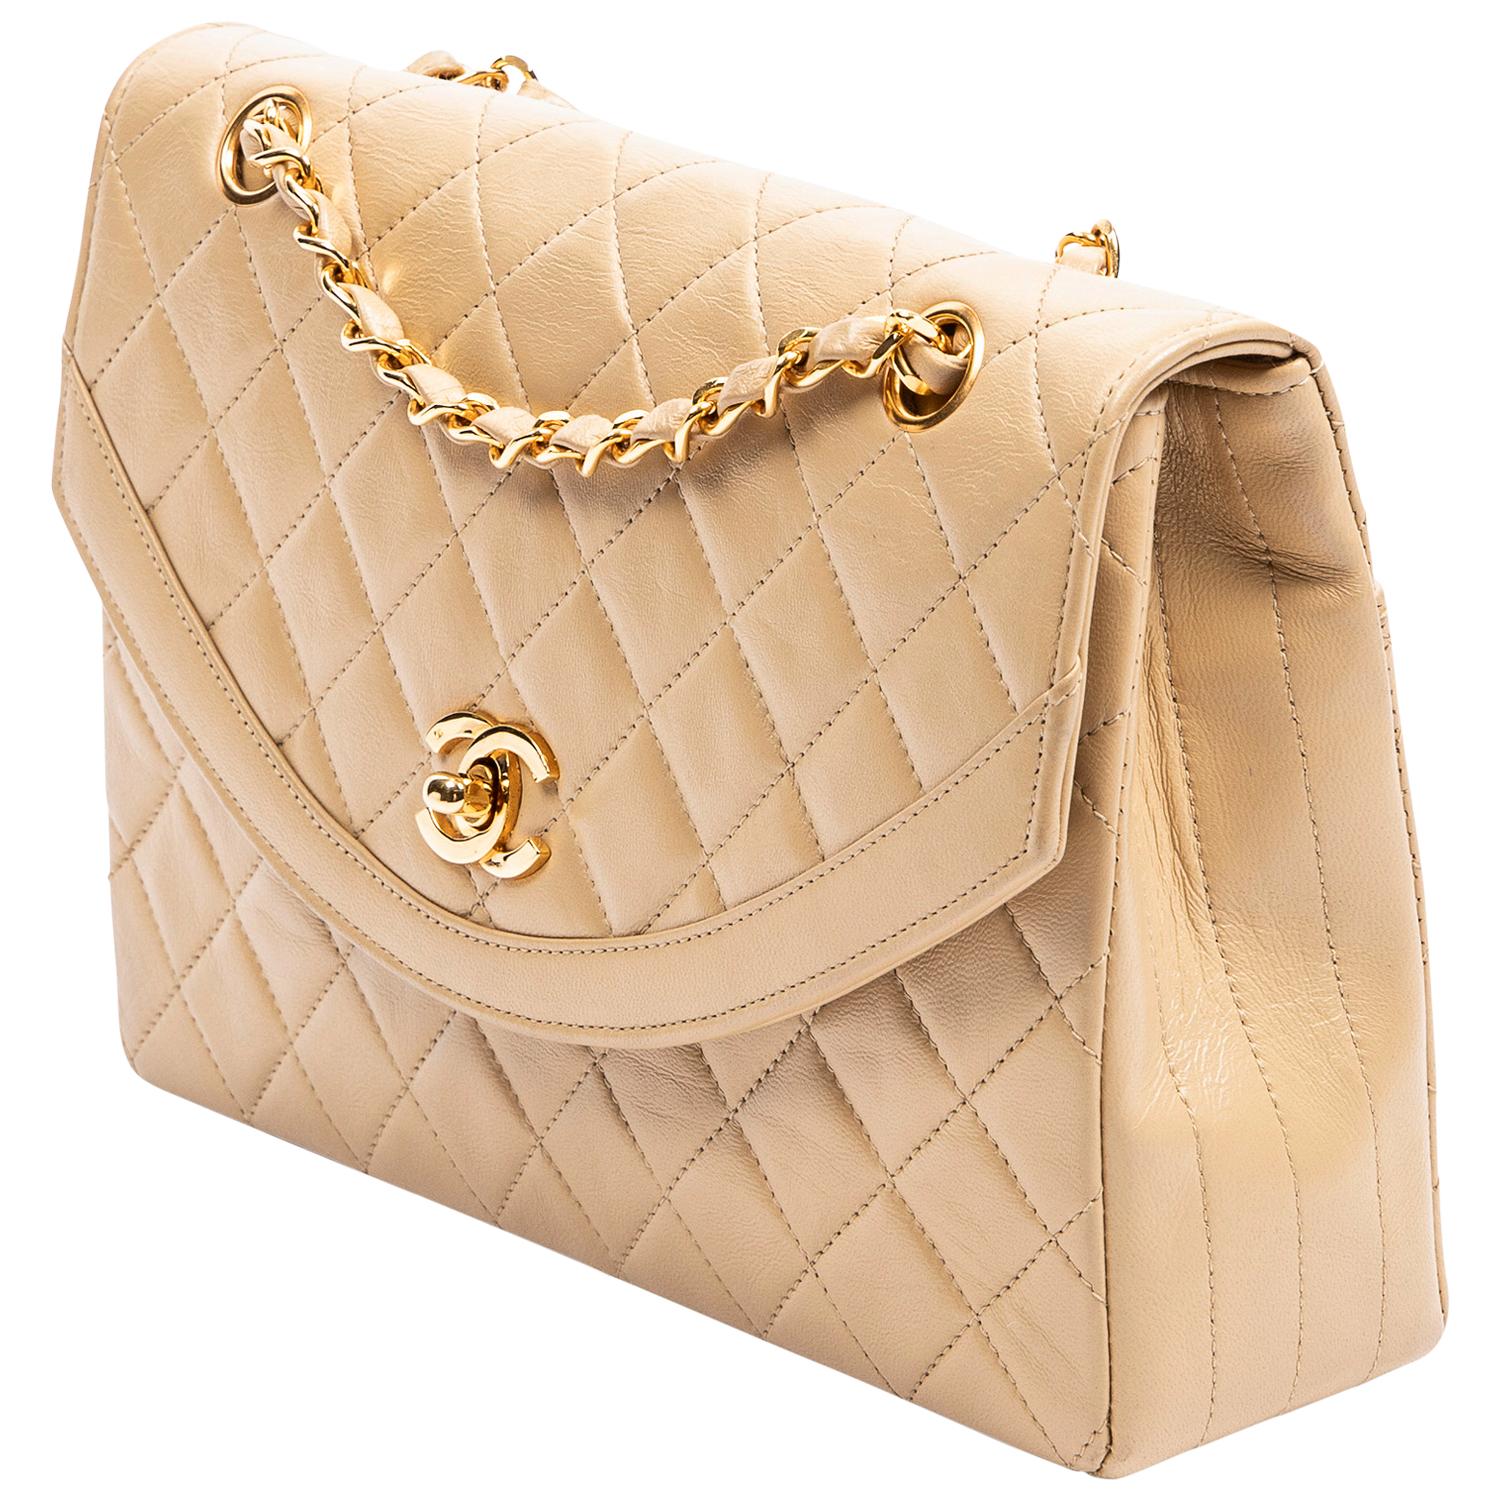 A super rare vintage beauty perfect produced in 1986 for every occasion! The condition is spectacular! Crafted in beige quilted lambskin leather with a beautiful leather trimming and stitched side panels, 24K gold plated hardware, chain-link